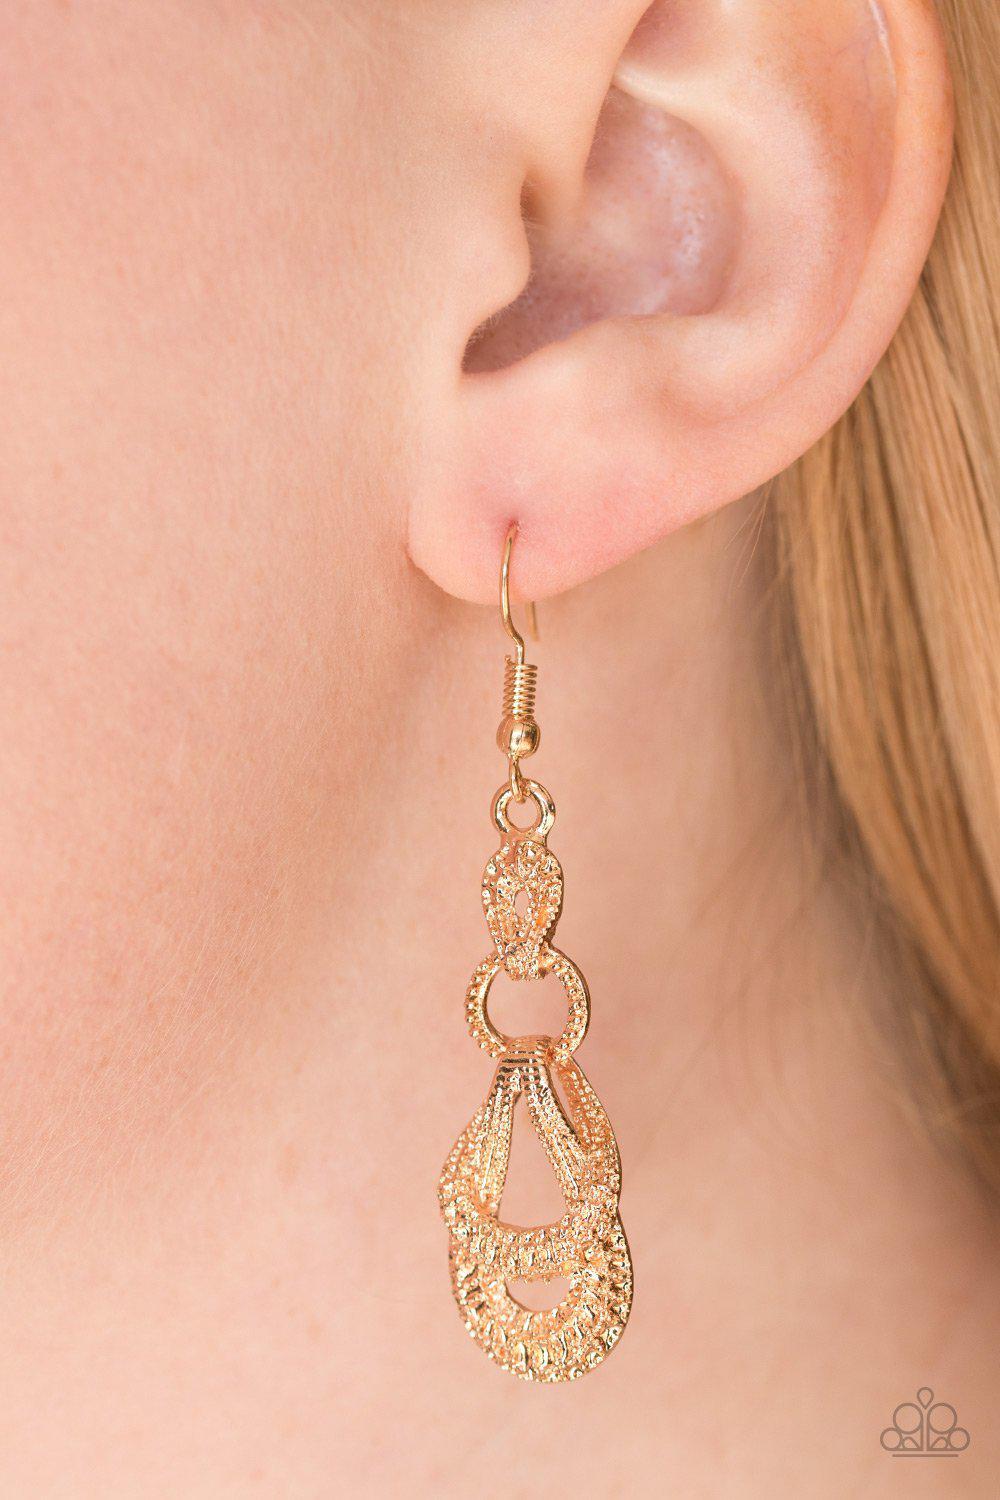 Romantic Radiance Gold Earrings - Paparazzi Accessories-CarasShop.com - $5 Jewelry by Cara Jewels